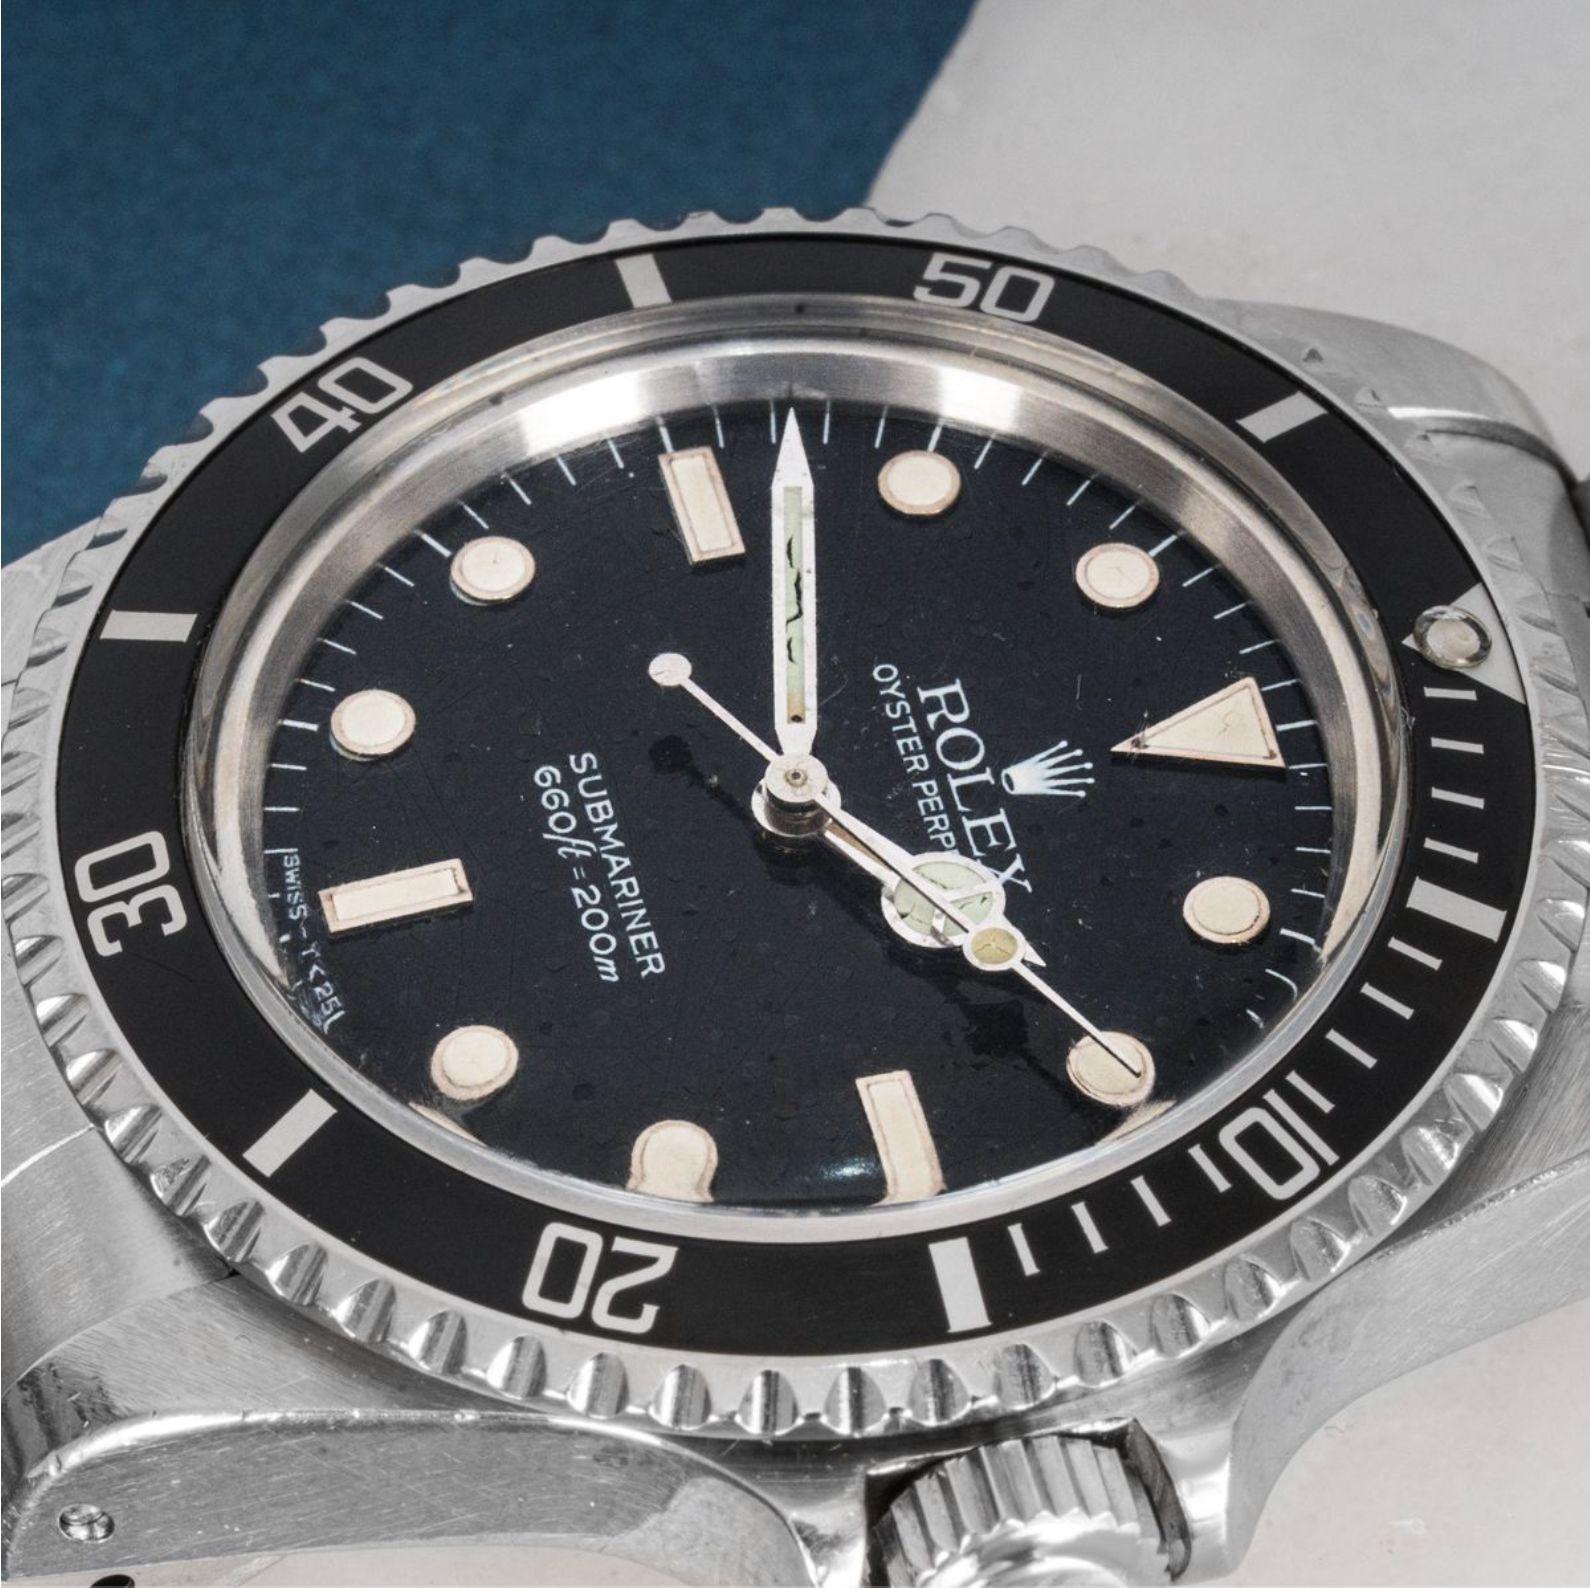 A stainless steel Submariner by Rolex. Featuring a distinctive black glossy spider dial with applied hour markers and a uni-directional rotatable bezel.

Fitted with a plastic glass, a self-winding automatic movement and an Oyster bracelet equipped